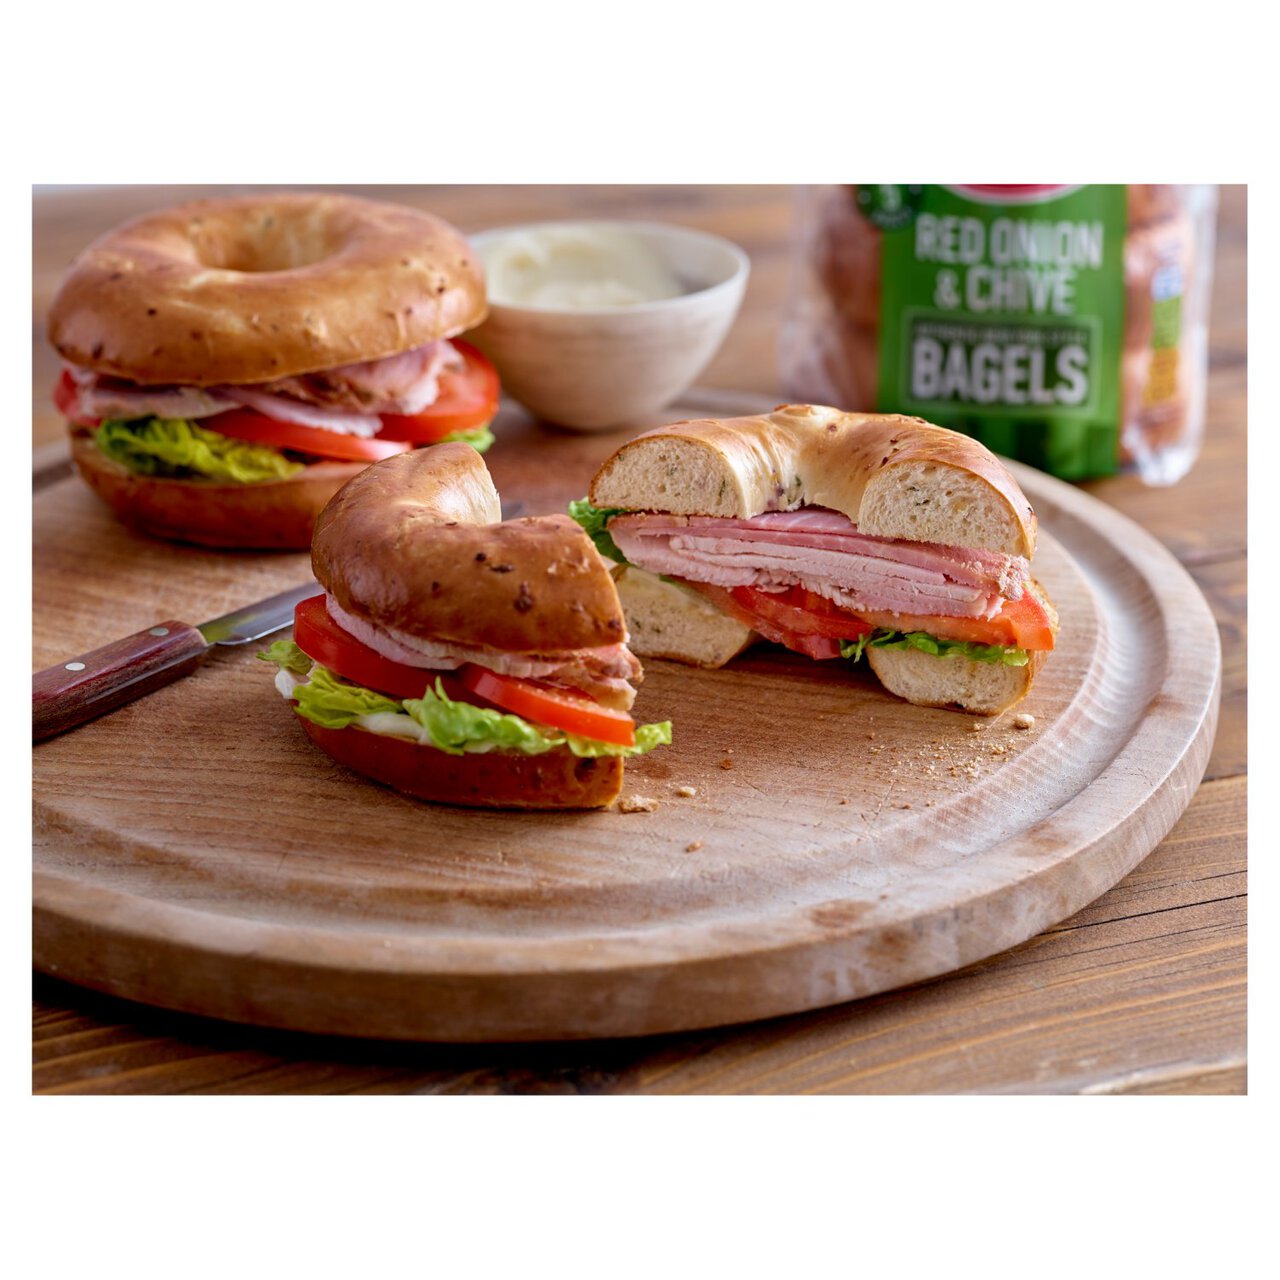 New York Bakery Co. Red Onion & Chive Bagel 5 per pack